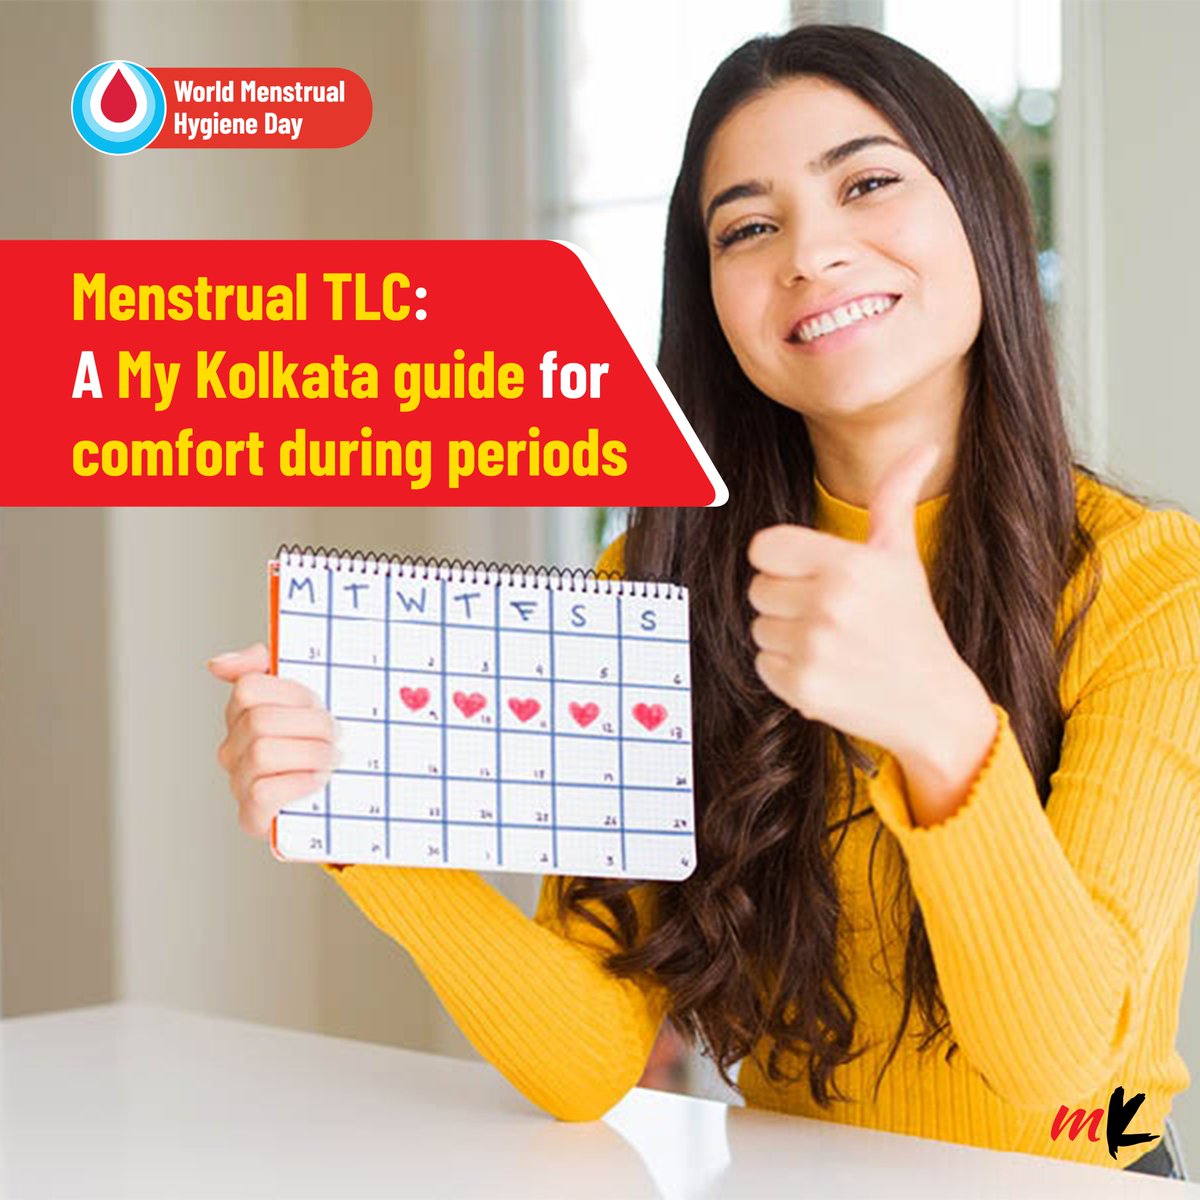 On World Menstrual Hygiene Day, here’s a list of menstrual wellness products to make those period days more comfortable for you.
Read more here: telegraphindia.com/my-kolkata/lif…
 #Menstruation #Period #PeriodTalk #MenstrualProducts #PeriodStruggles #MenstrualWellness #TLC #IndianBrands